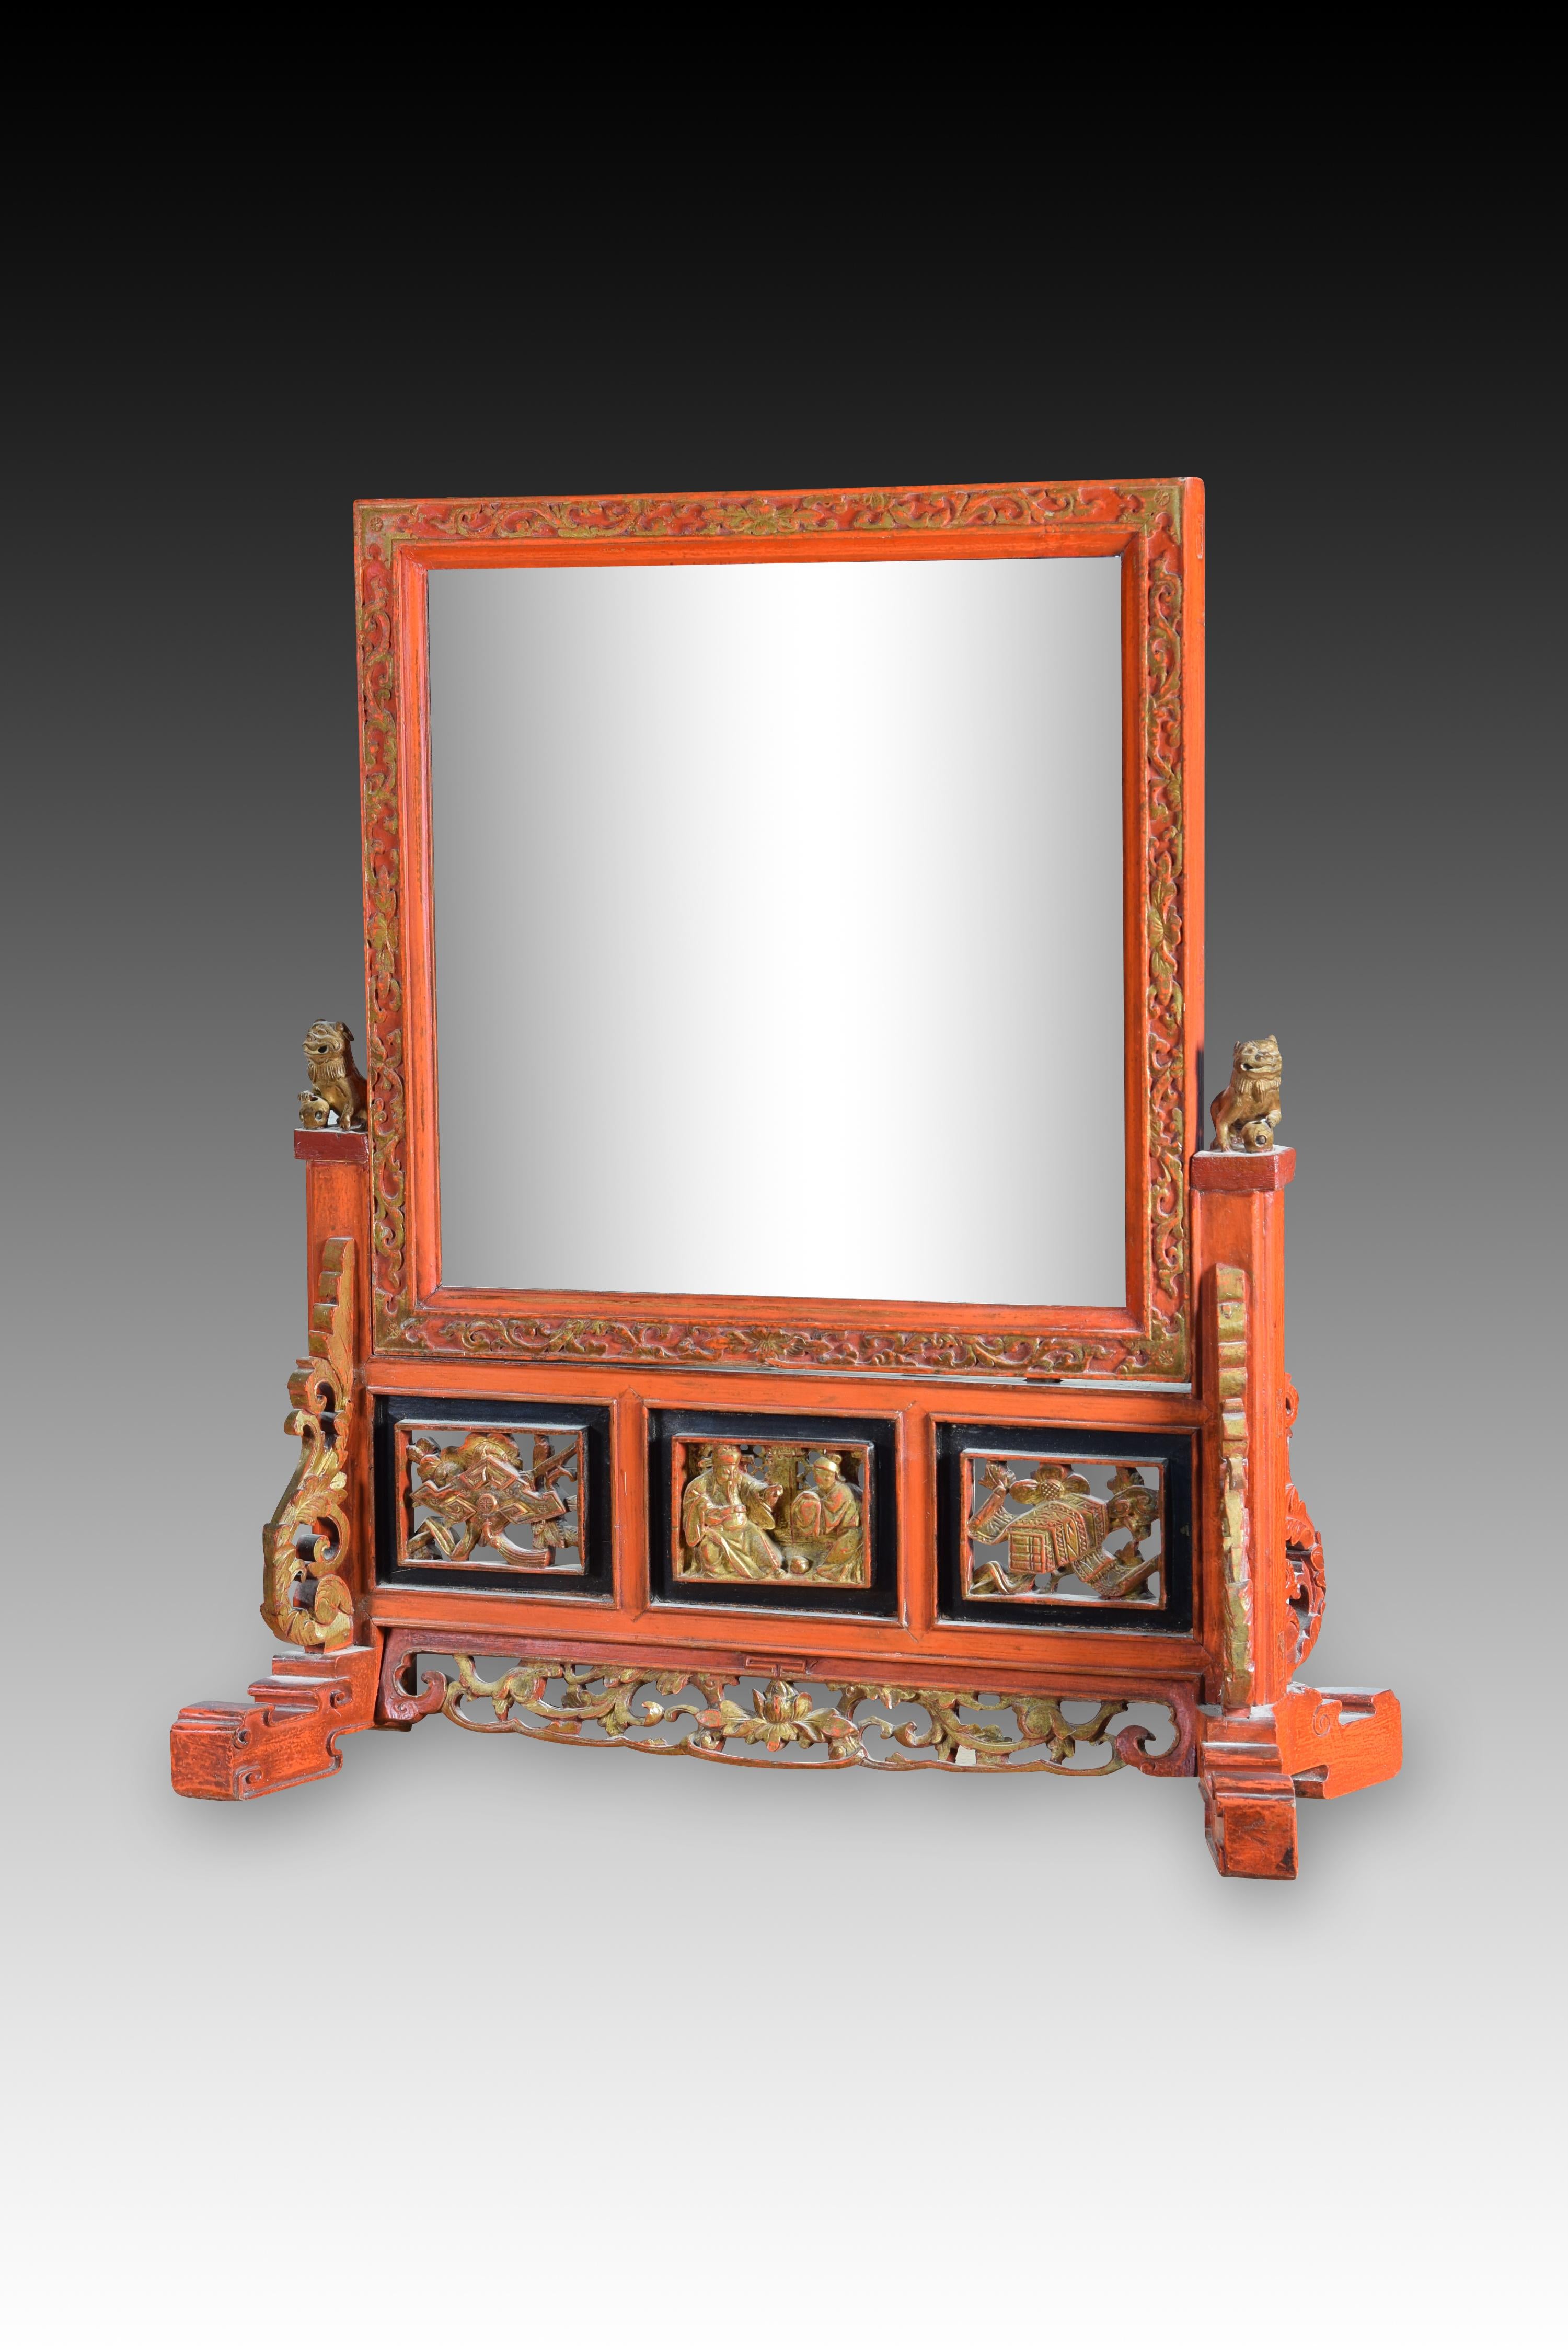 Oriental table mirror. Carved wood. China, 19th century.
 Oriental style table mirror made of wood, and with decorations highlighted in gold. Both the style of the piece and these decorations (fu lions, flowers, characters, moldings, etc.) are